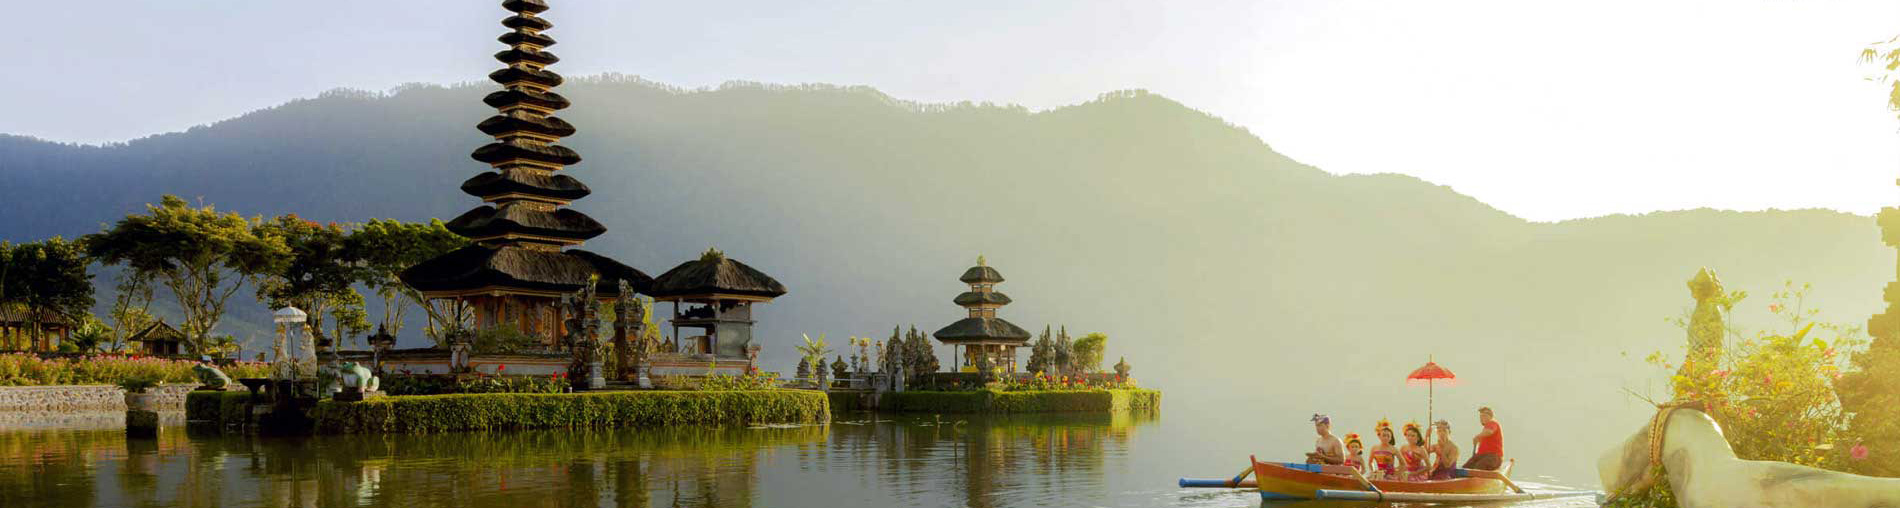 Places To Visit In Indonesia